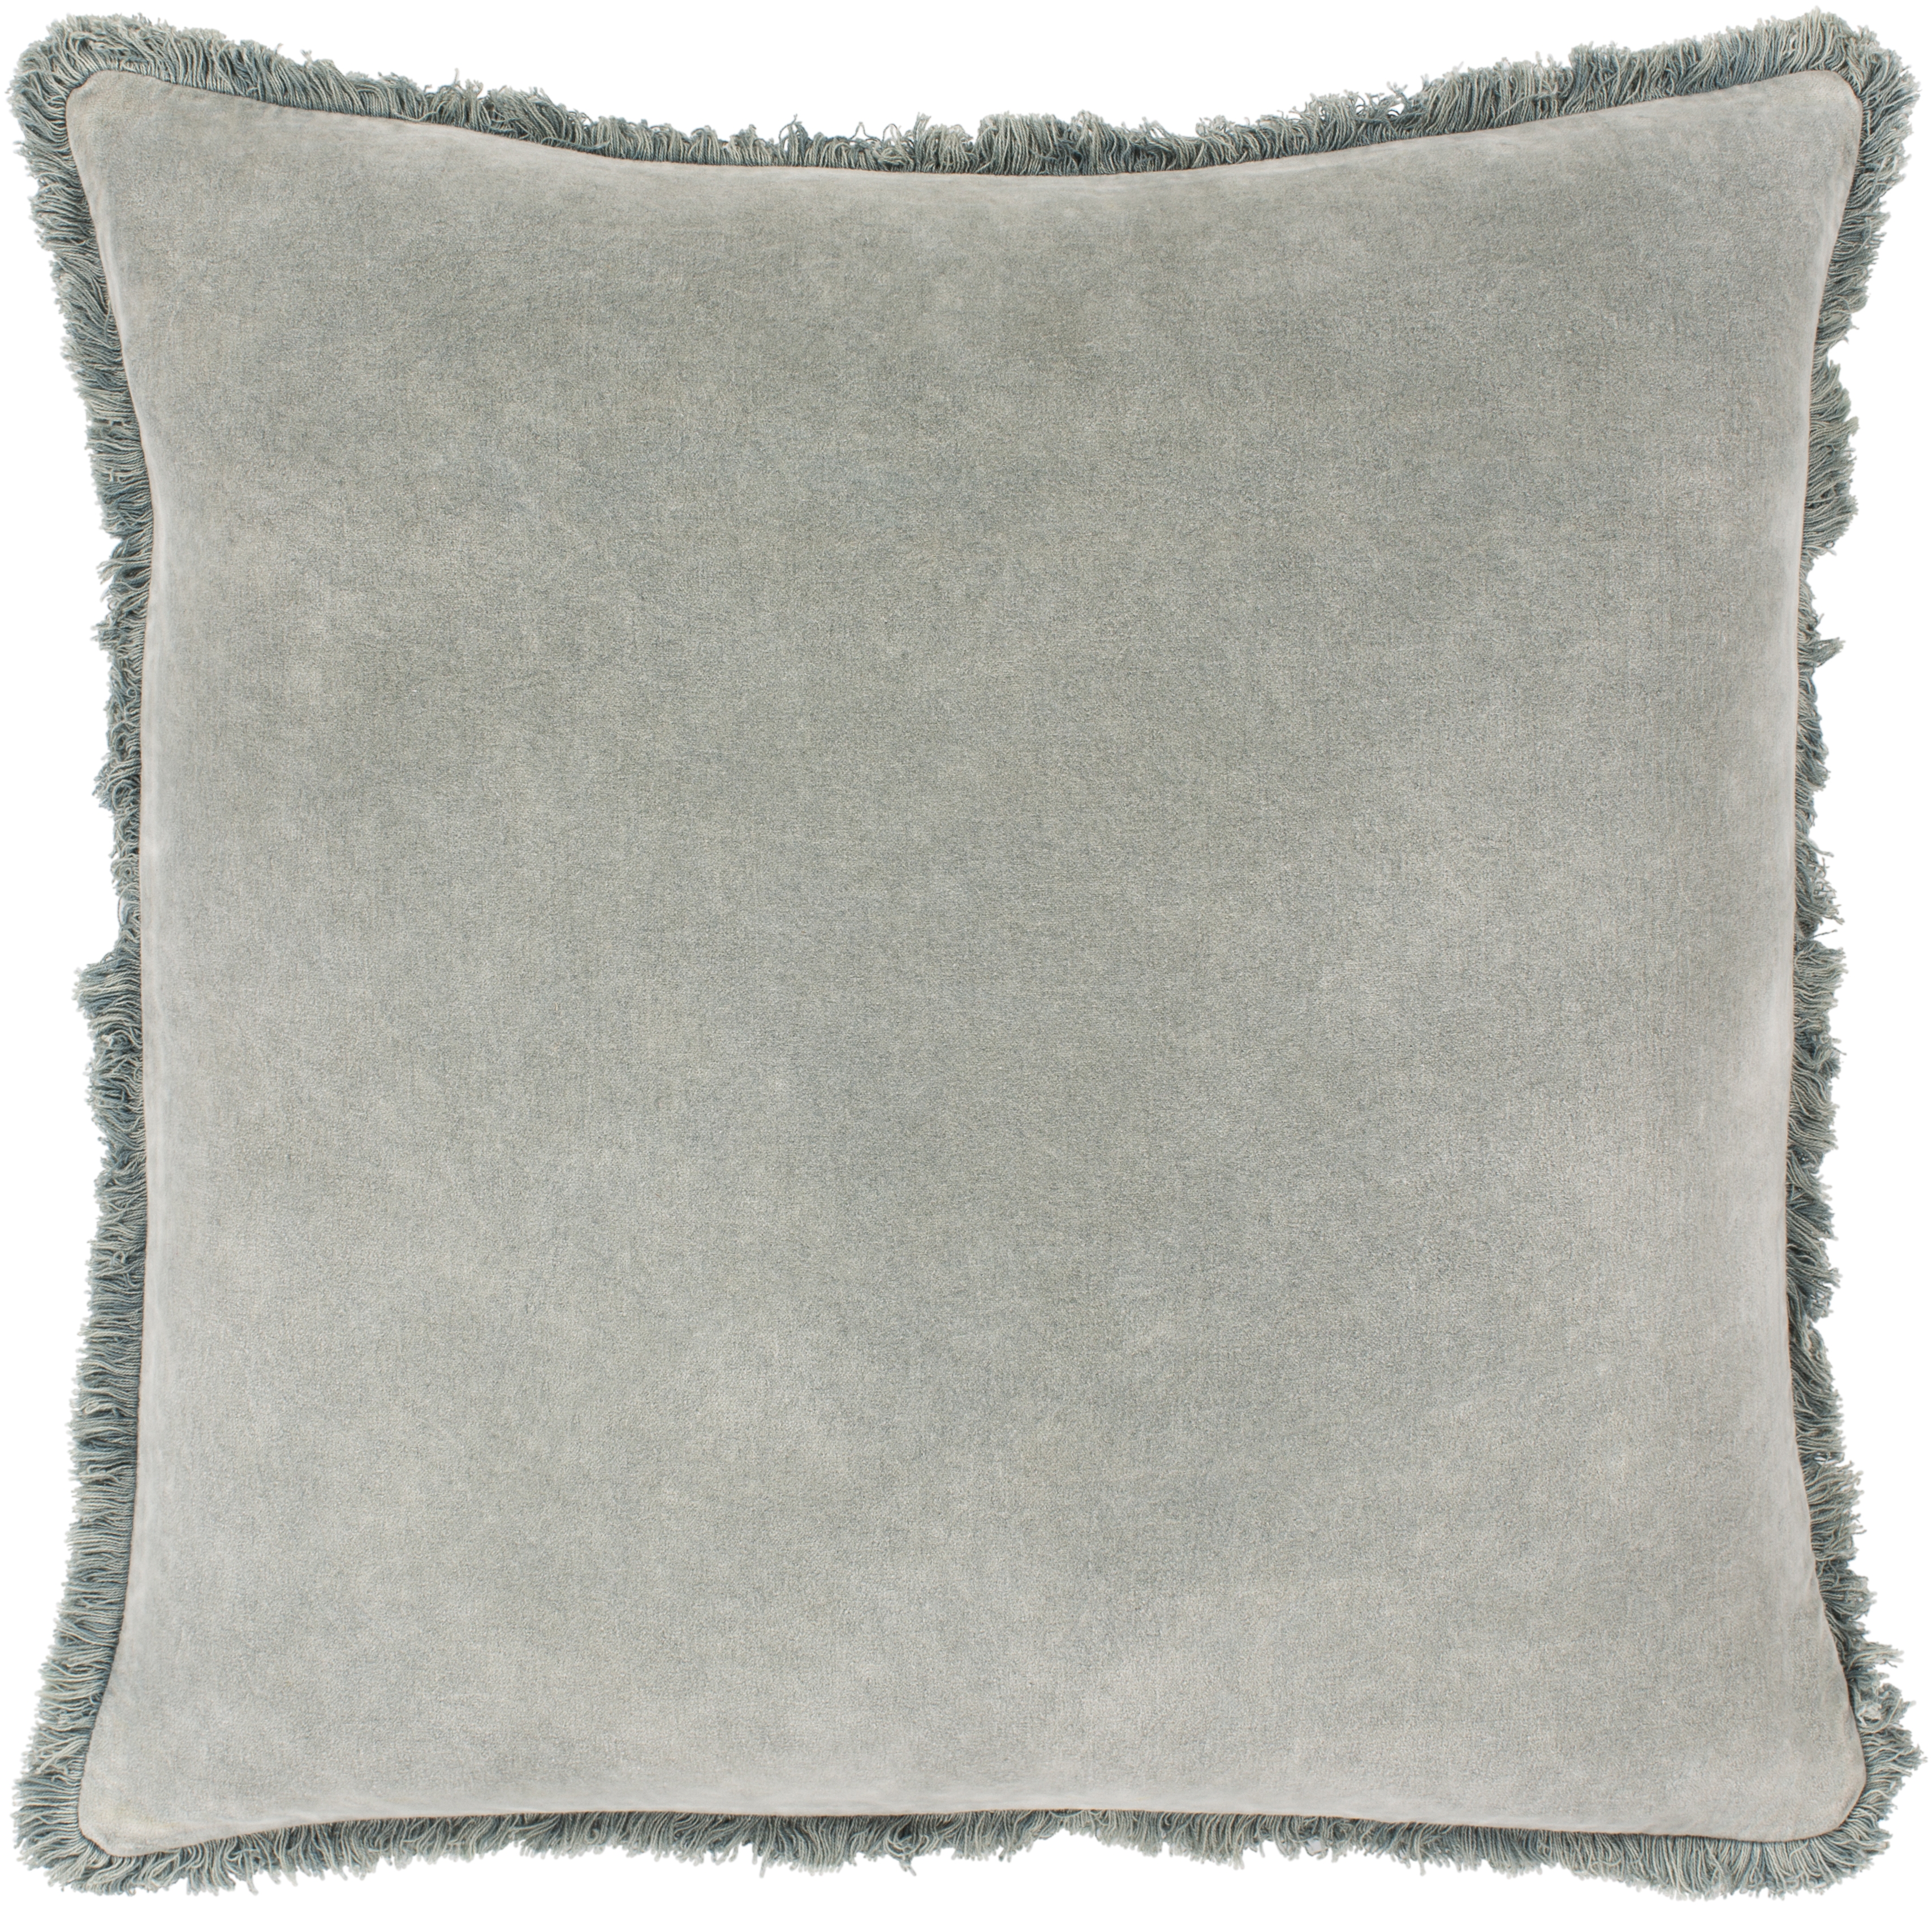 Washed Cotton Velvet Throw Pillow, 22" x 22", with down insert - Image 0